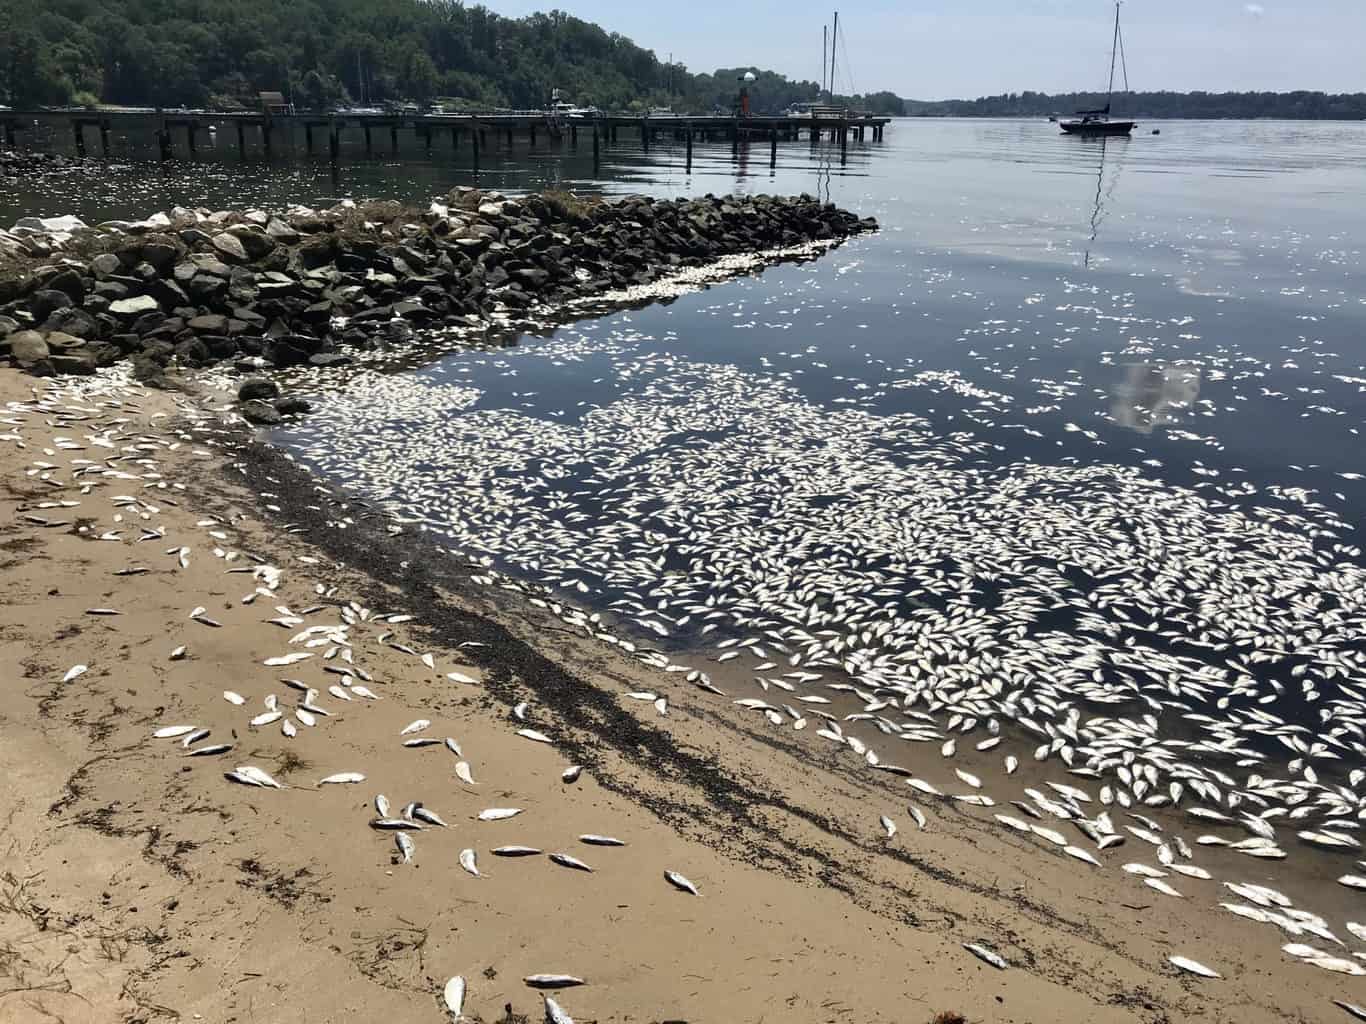 VIDEO: 10K Fish Dead on Severn River Due to Isaias